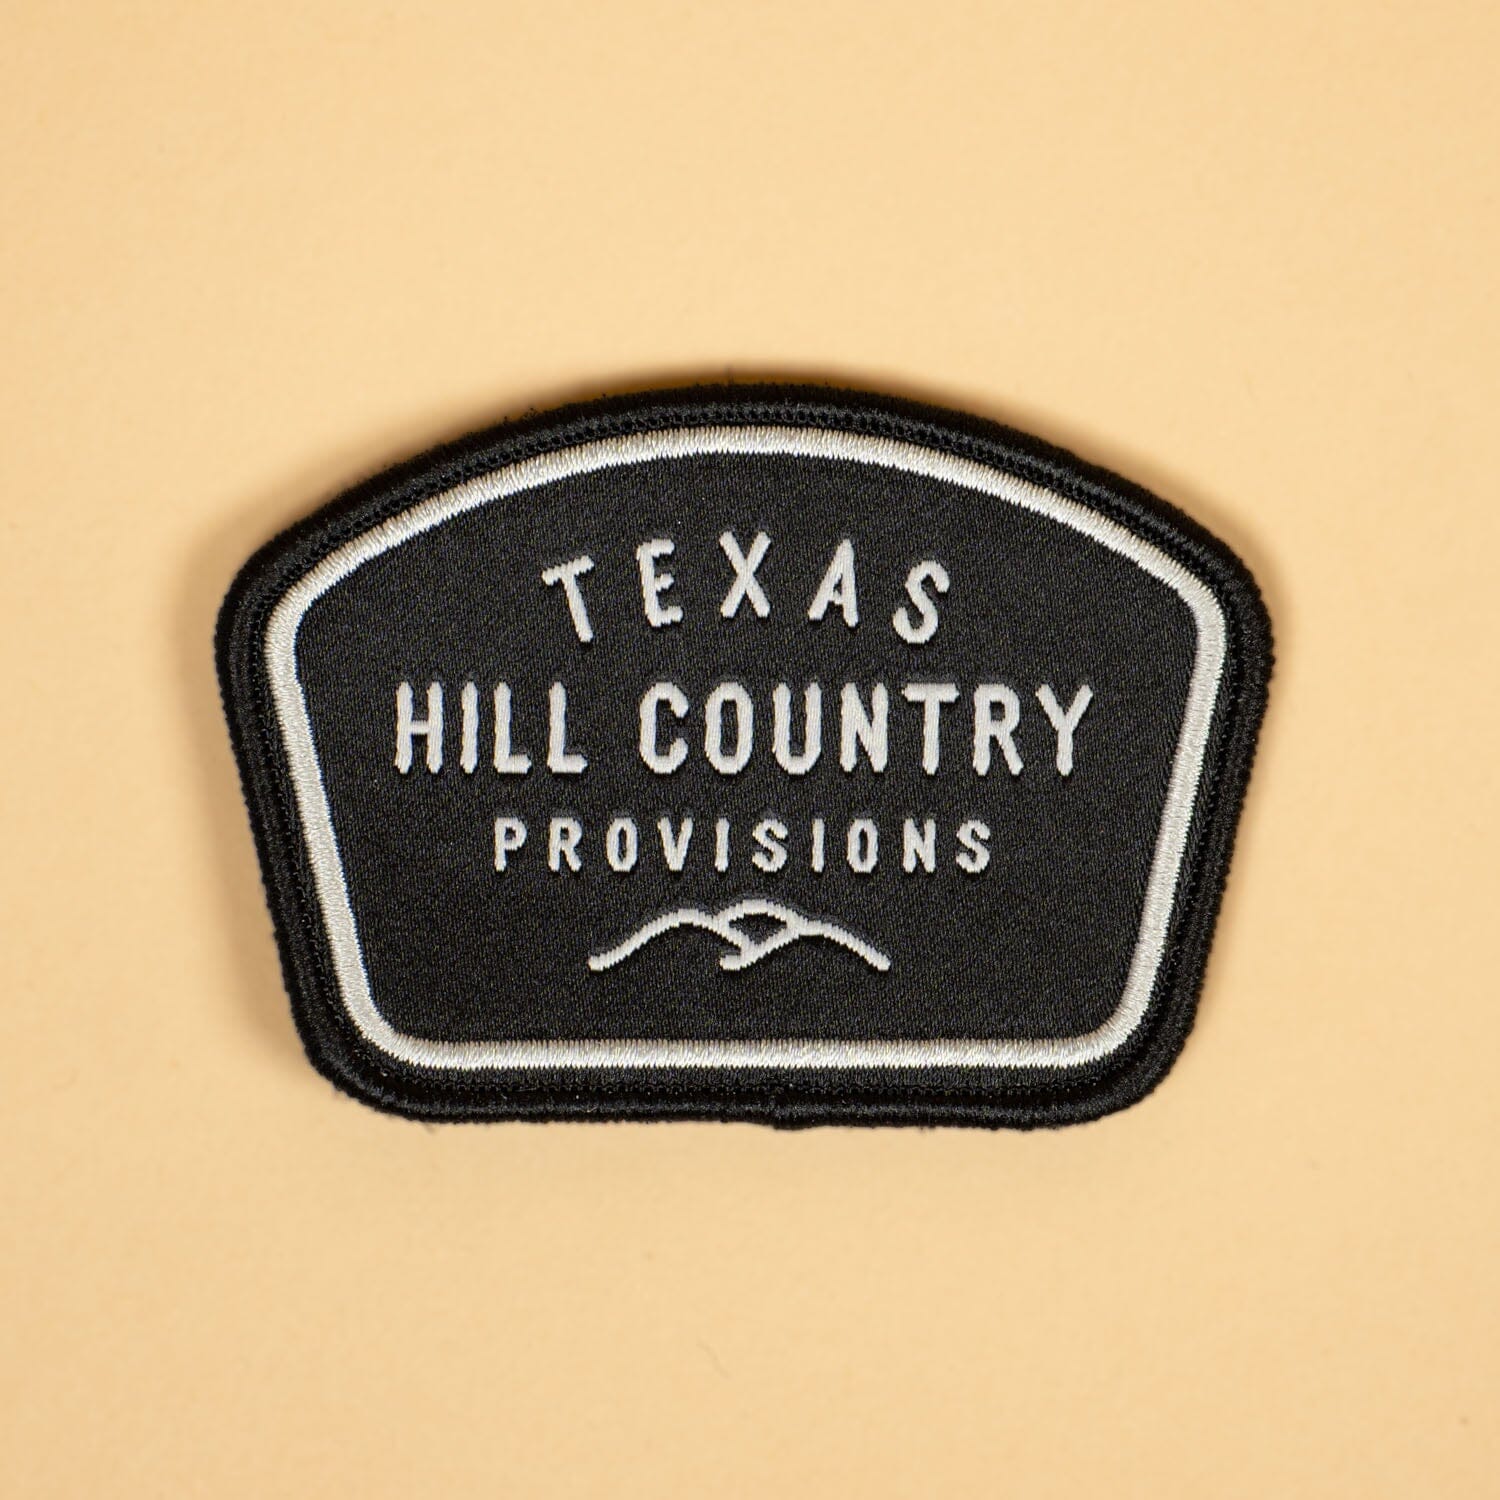 THC V1 Patch Texas Hill Country Provisions Black 